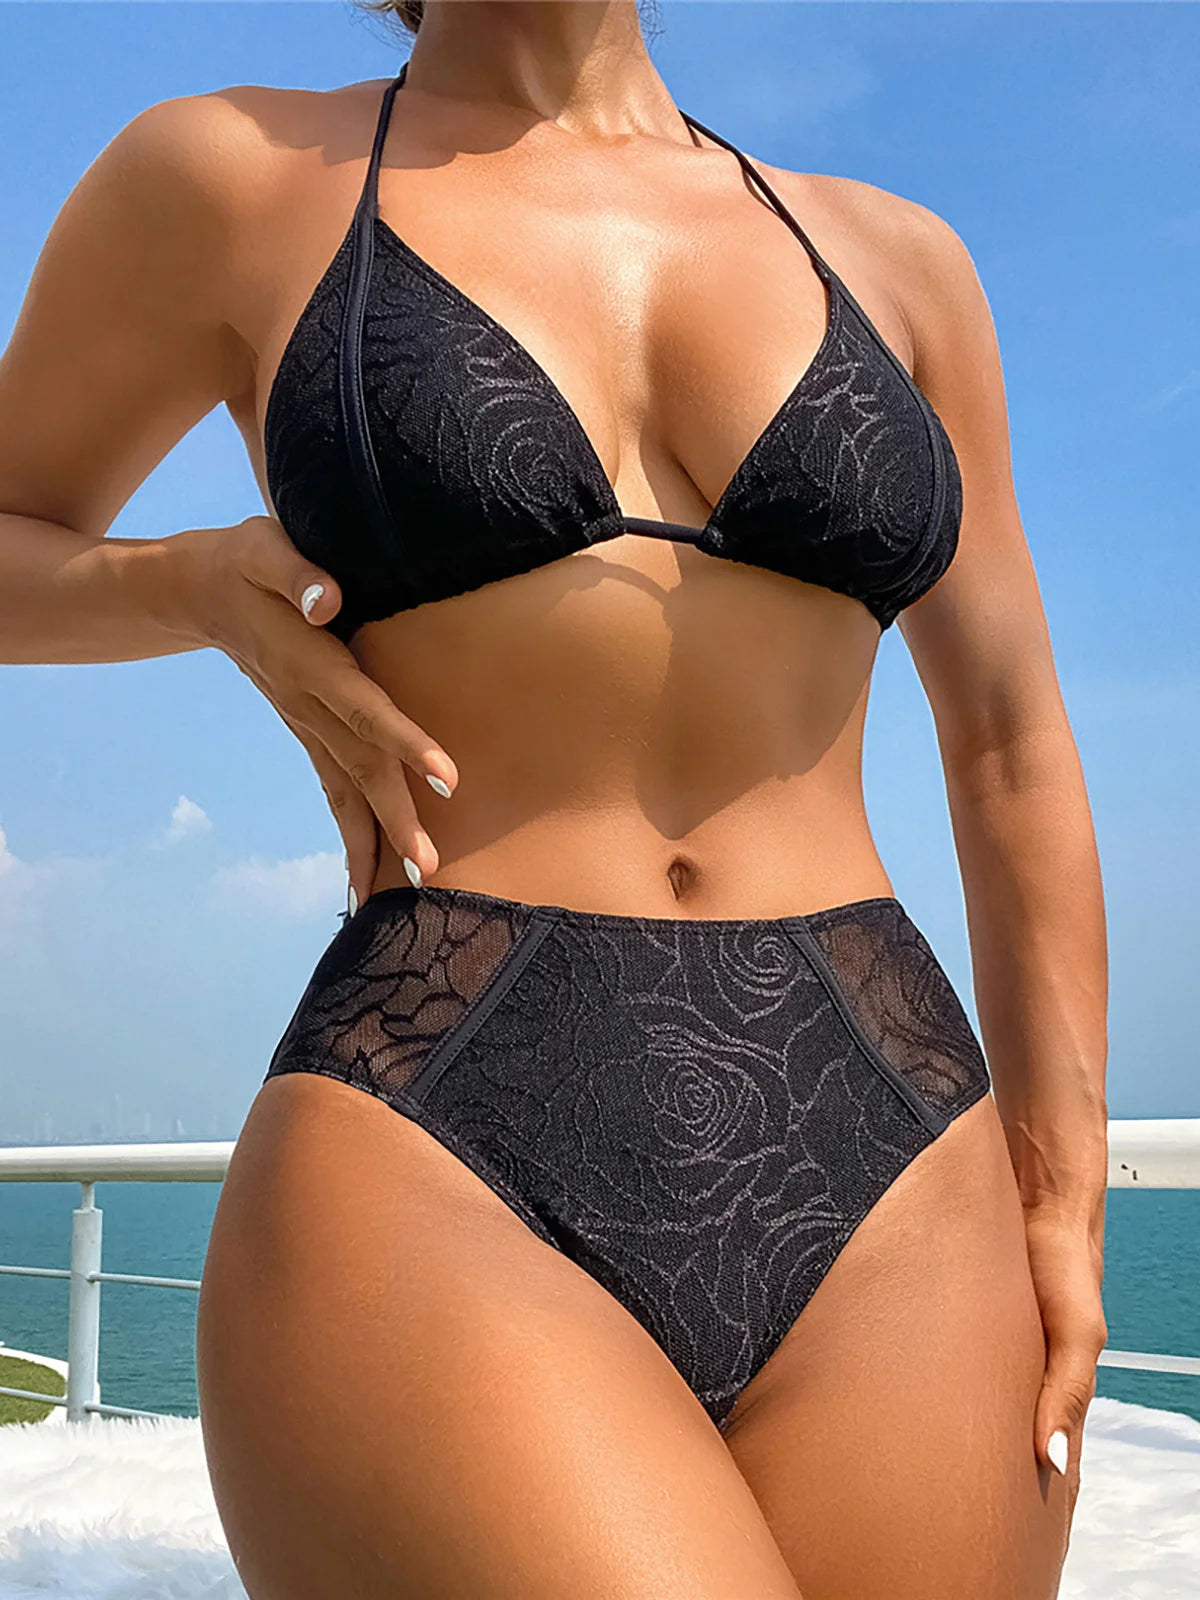 Intricately embroidered halter bikini set in black for women. Features a mid-waist cut for comfort and style, made from Nylon and Spandex. Offers wire free support and fits true to size. This elegant two-piece solid bikini comes with a pad. Available in sizes XS, S, M, and L. Free shipping on this modern swimwear, fit for women aged 18 to 35.